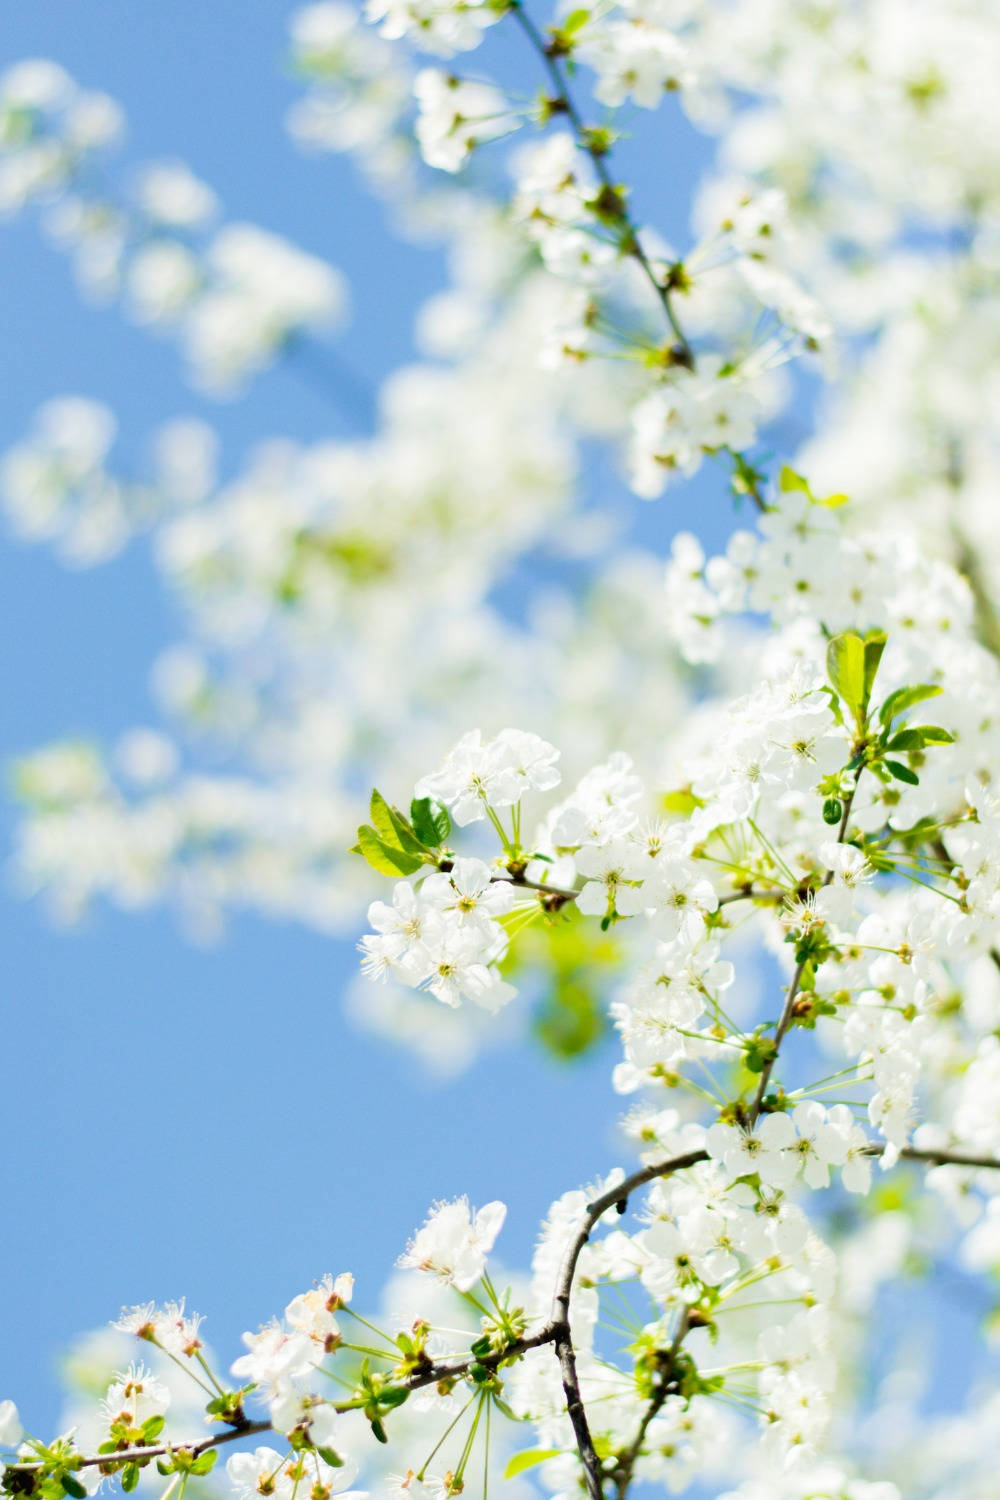 Free Aesthetic Spring Wallpapers Downloads, [100+] Aesthetic Spring Wallpapers for FREE